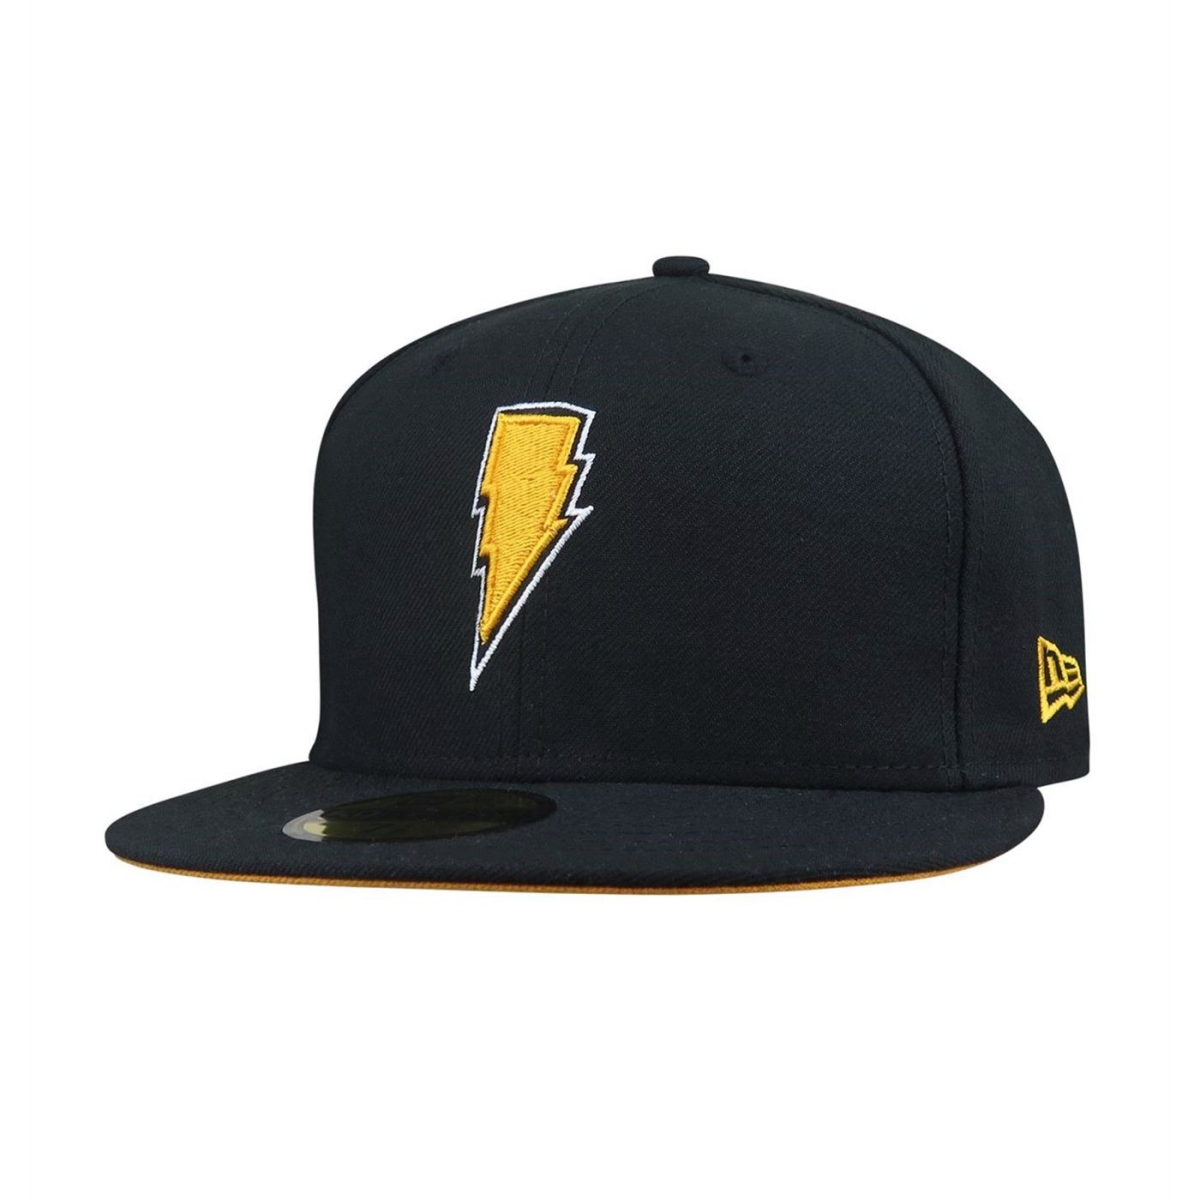 Picture of Black Adam capadmshz5950-718-7 1-8 Fitted Black Adam Lightning 59Fifty Hat - Size 7.125